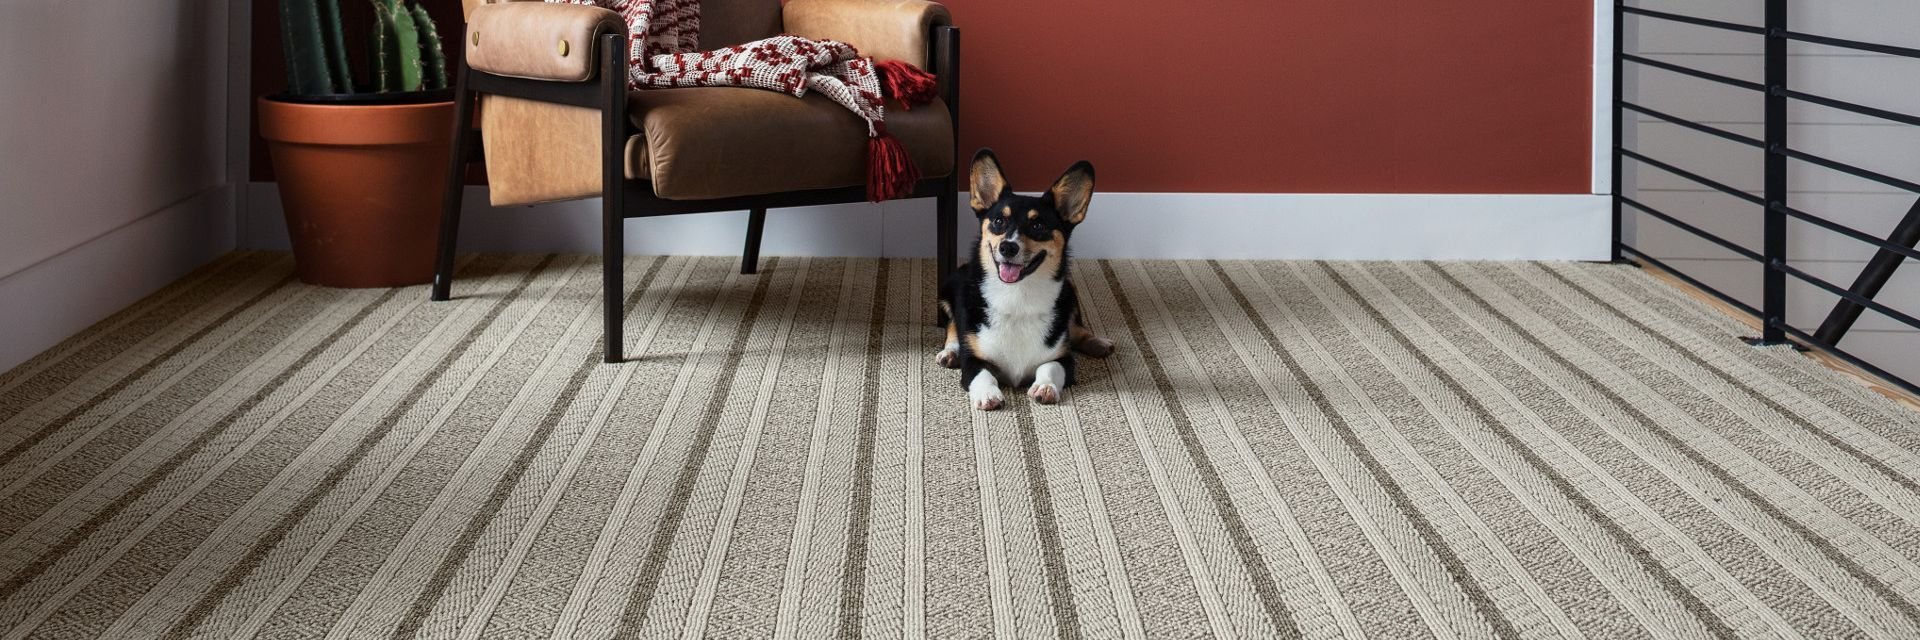 Dog in a room with red walls and patterned carpet from Matson Rugs, Inc in Berlin, CT